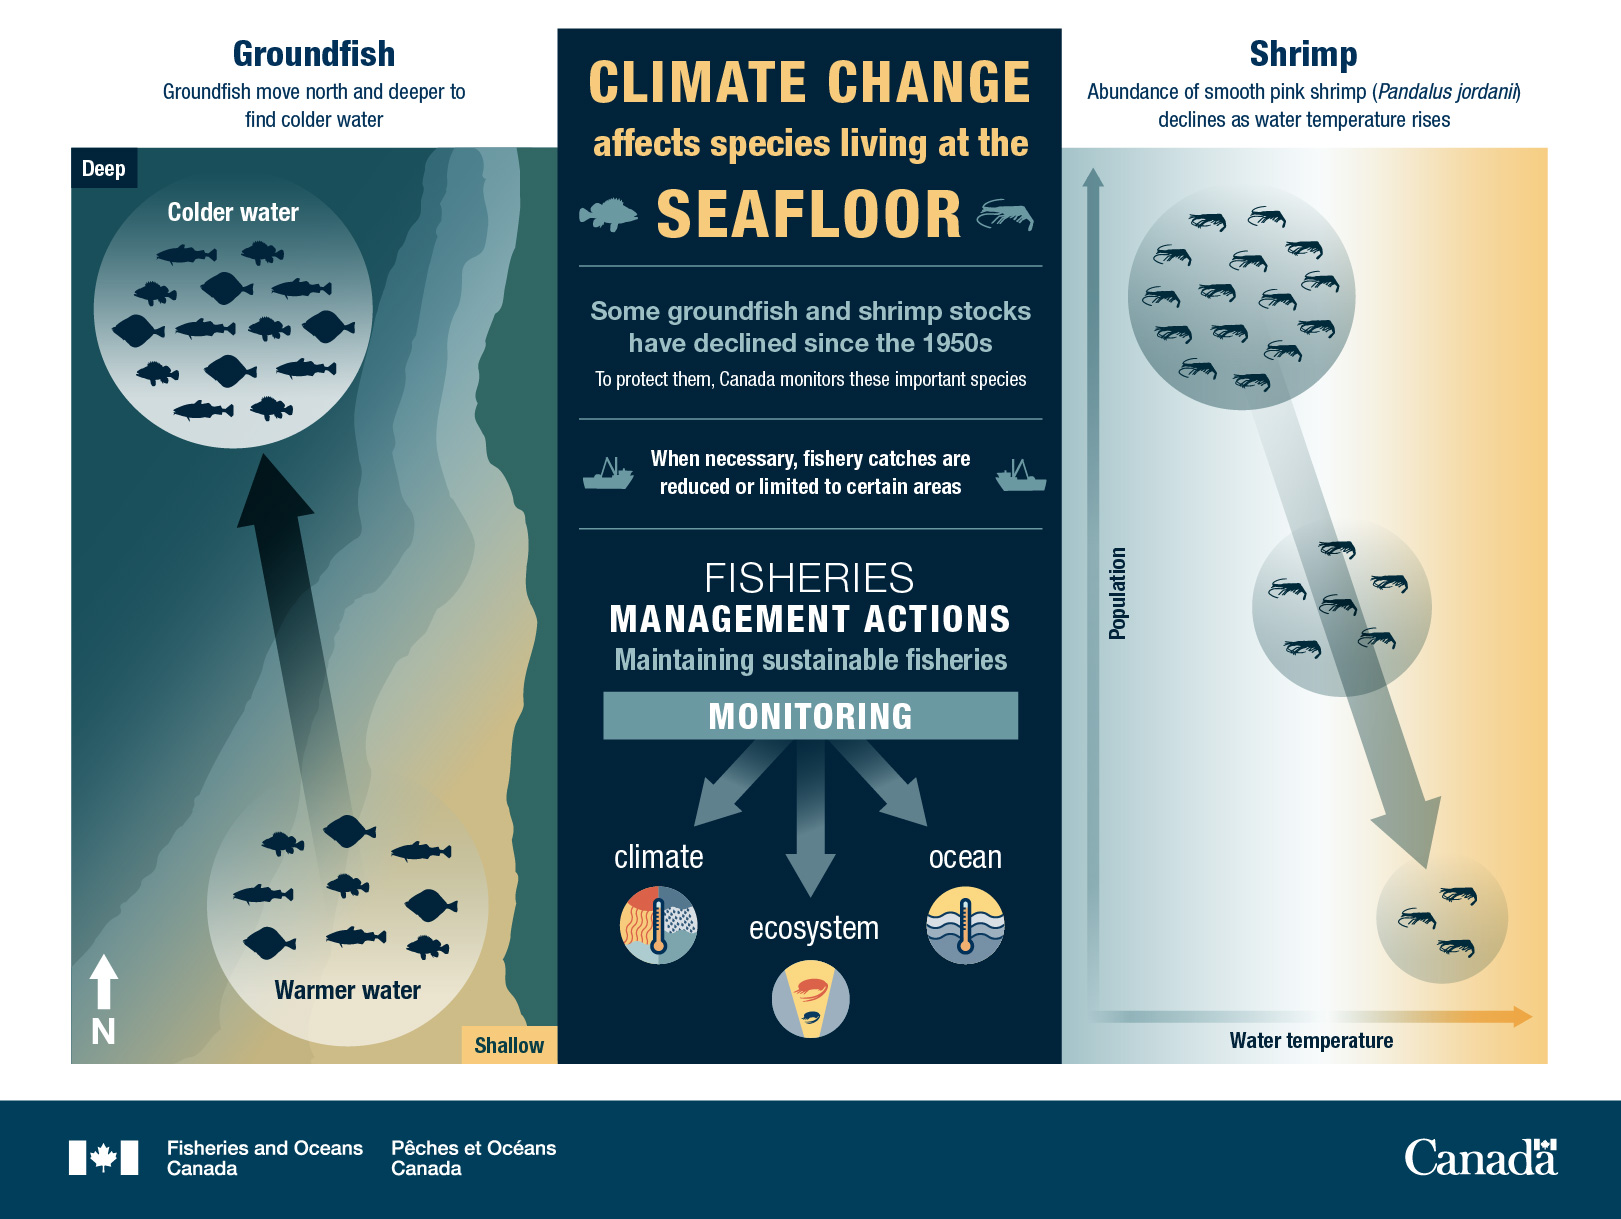 Climate change affects species living at the seafloor